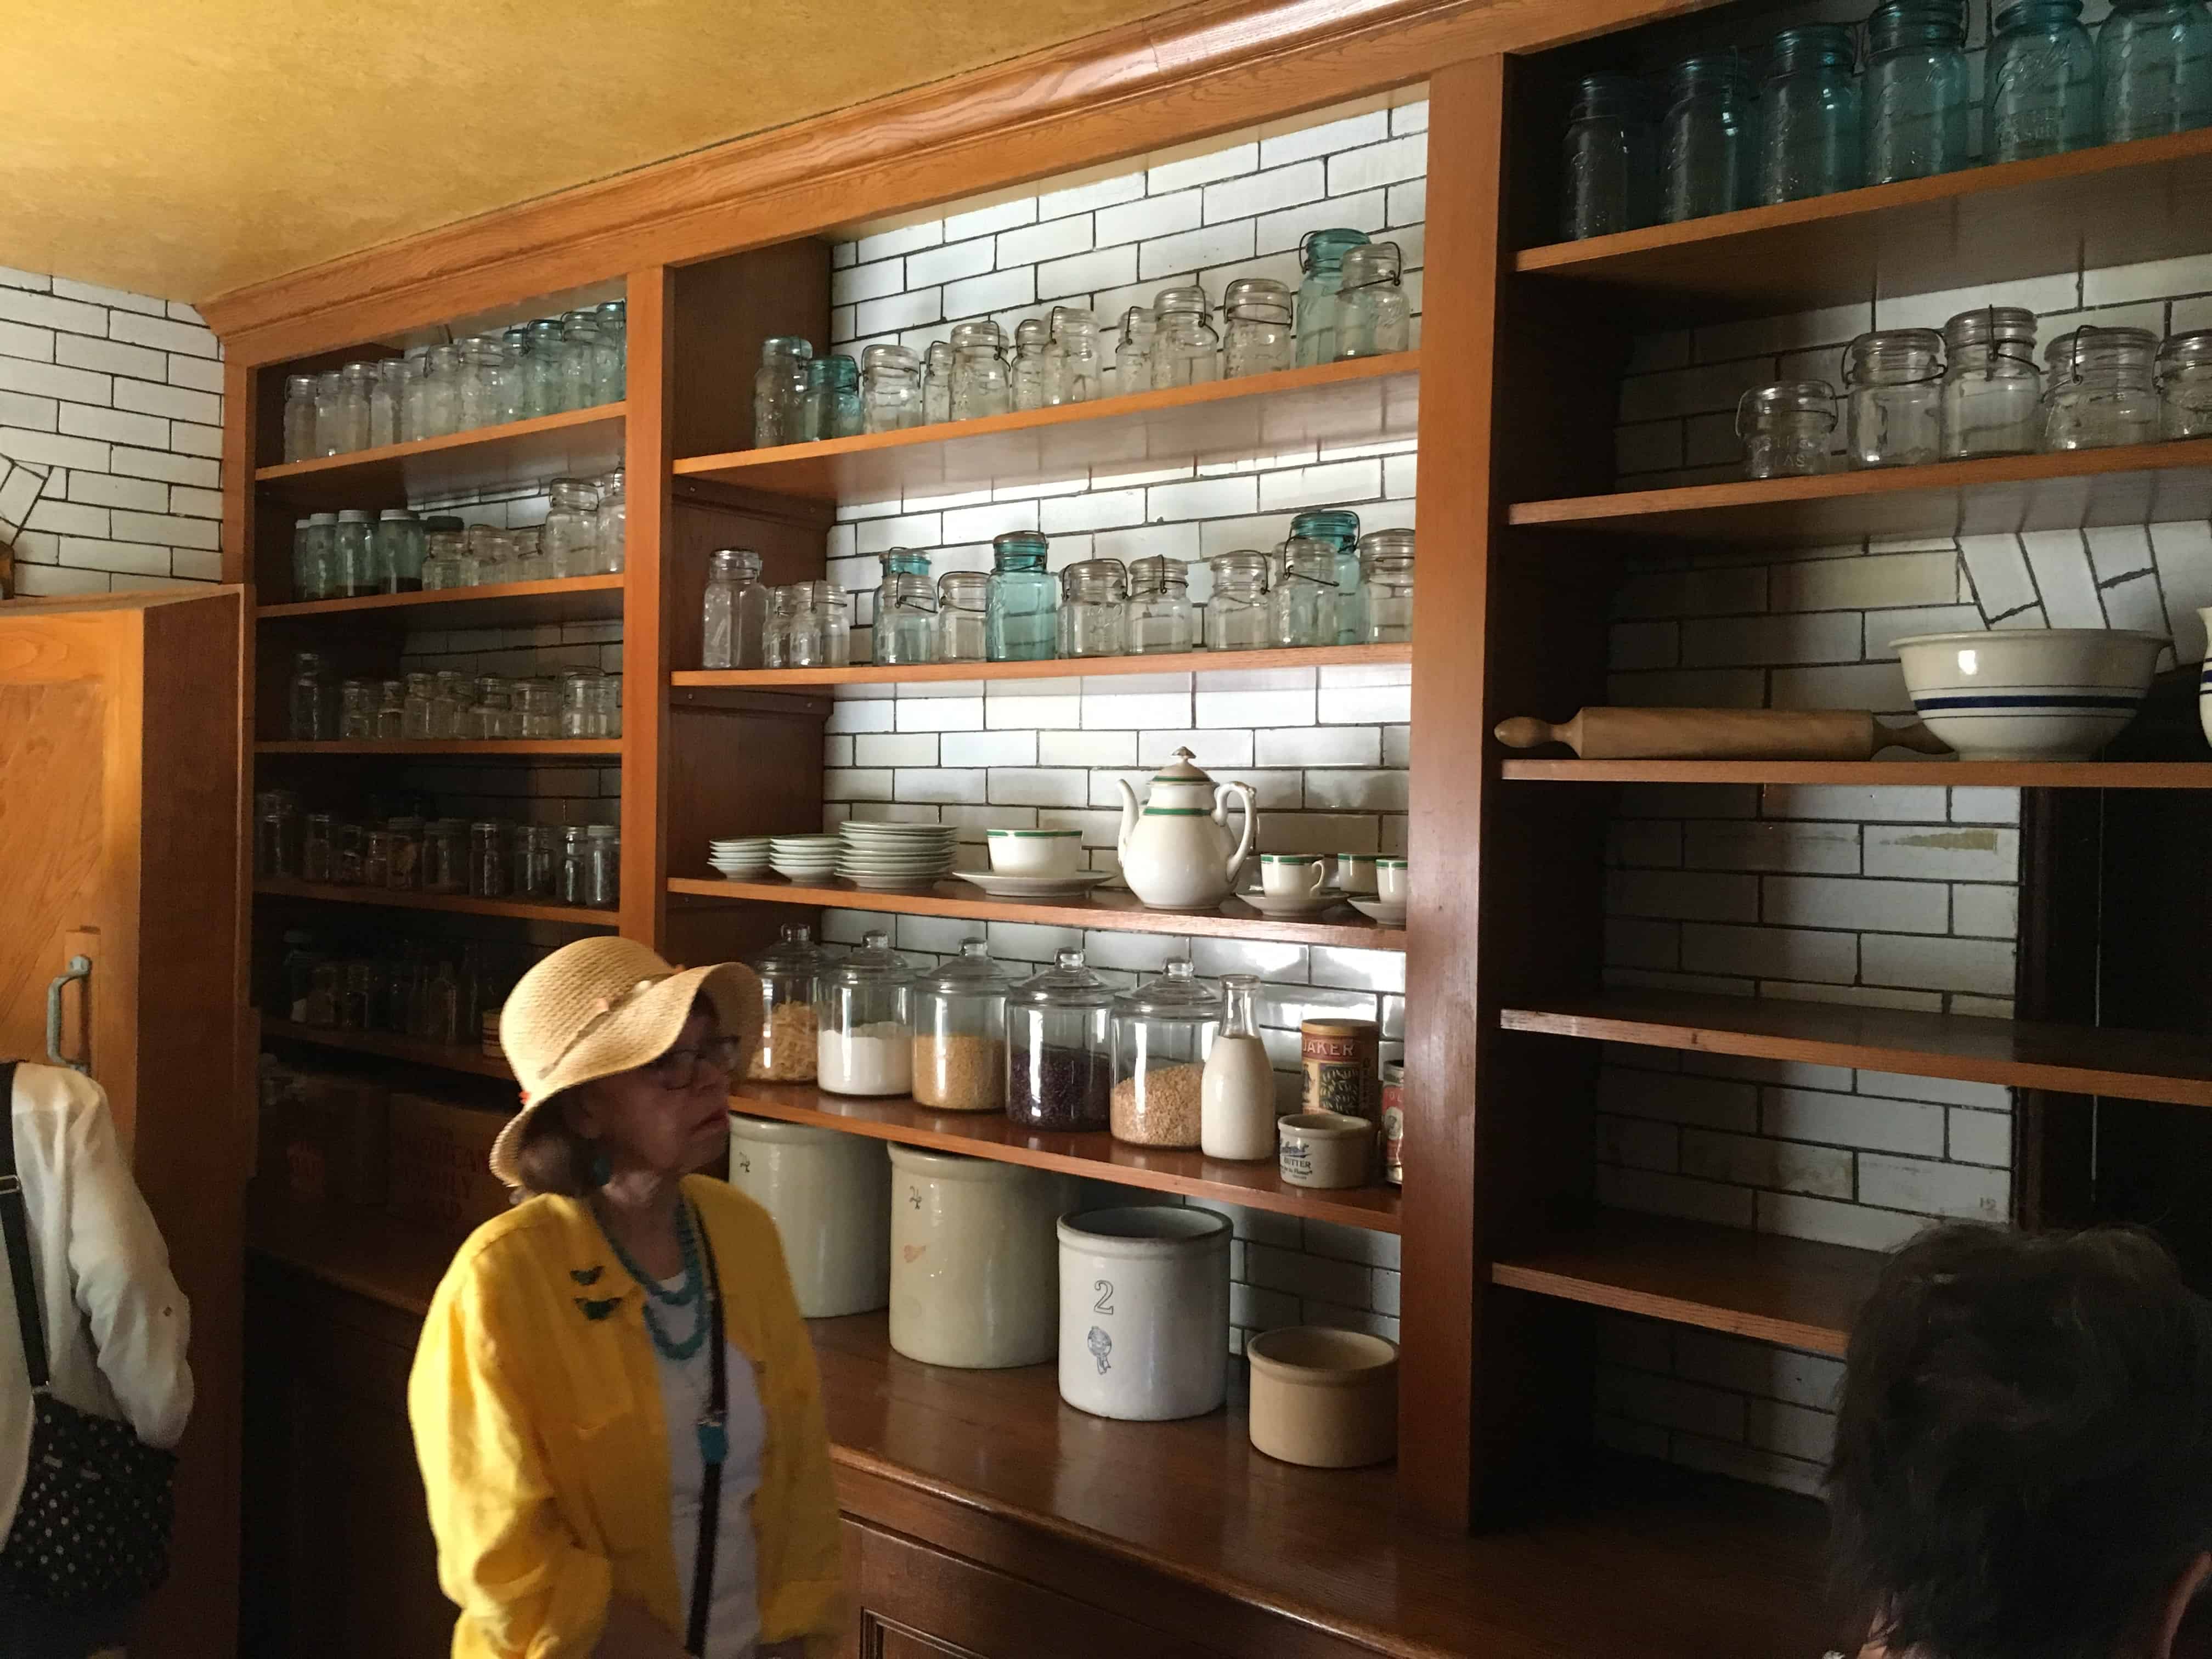 Pantry at the John J. Glessner House in Chicago, Illinois